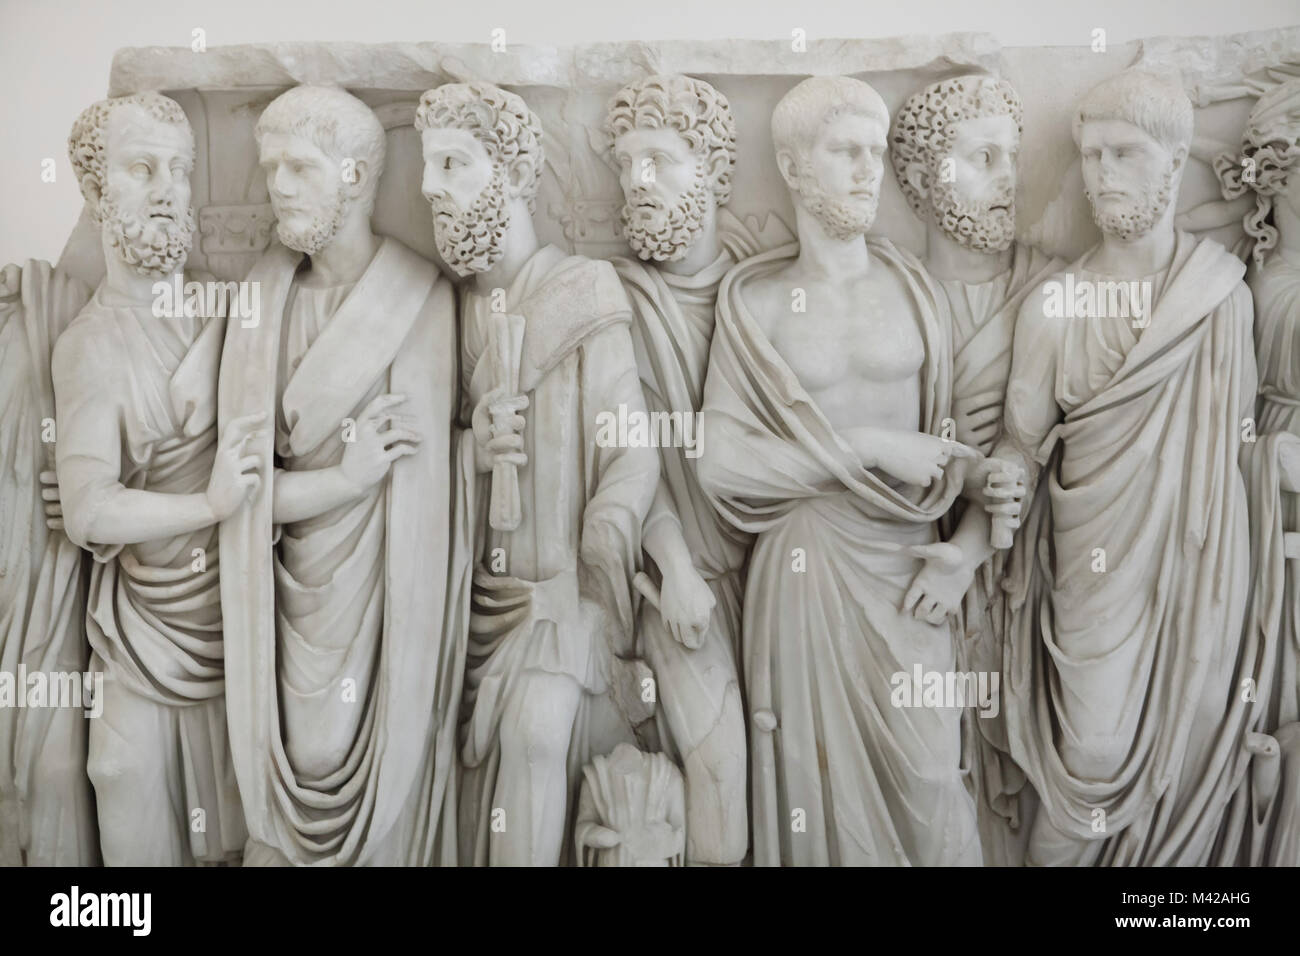 Sarcophagus with togate men, known as the Sarcophagus of the Brothers. Roman marble sarcophagus from the middle of the 3rd century AD from the Farnese Collection on display in the National Archaeological Museum in Naples, Campania, Italy. Stock Photo